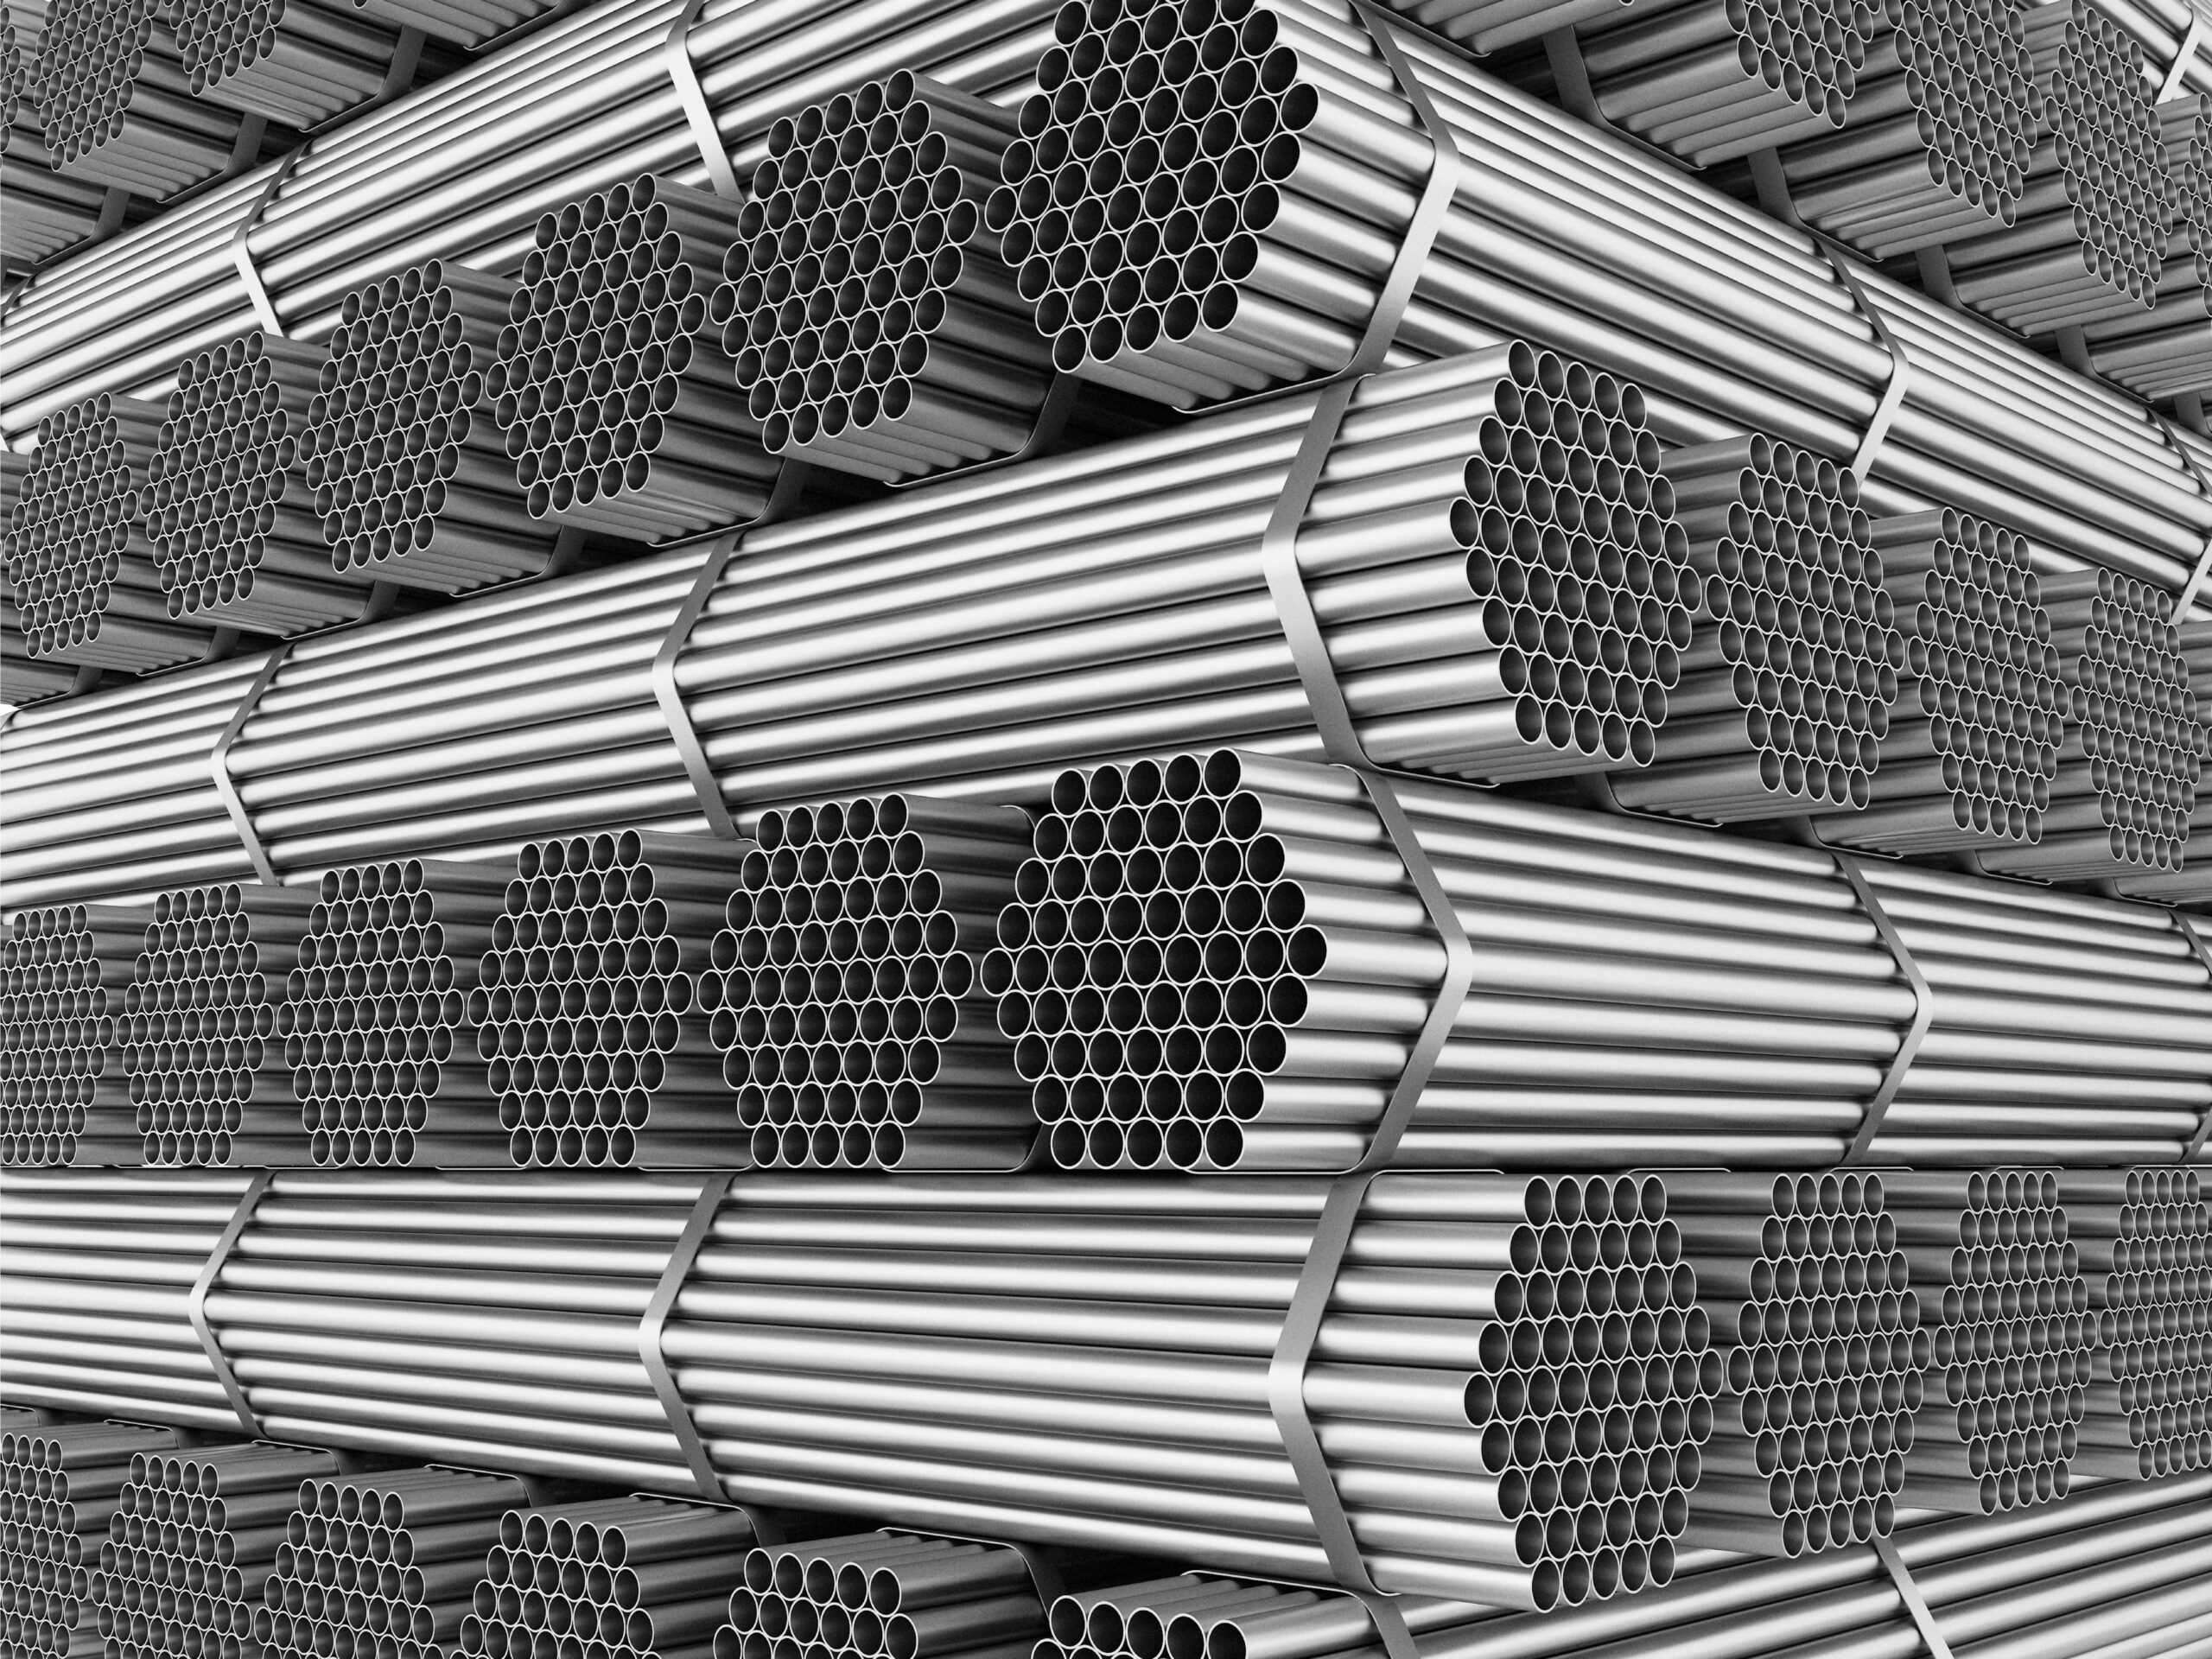 Steel pipes profile stack. Steel galvanized. Stainless steel profiles. 3D rendering. illustration.